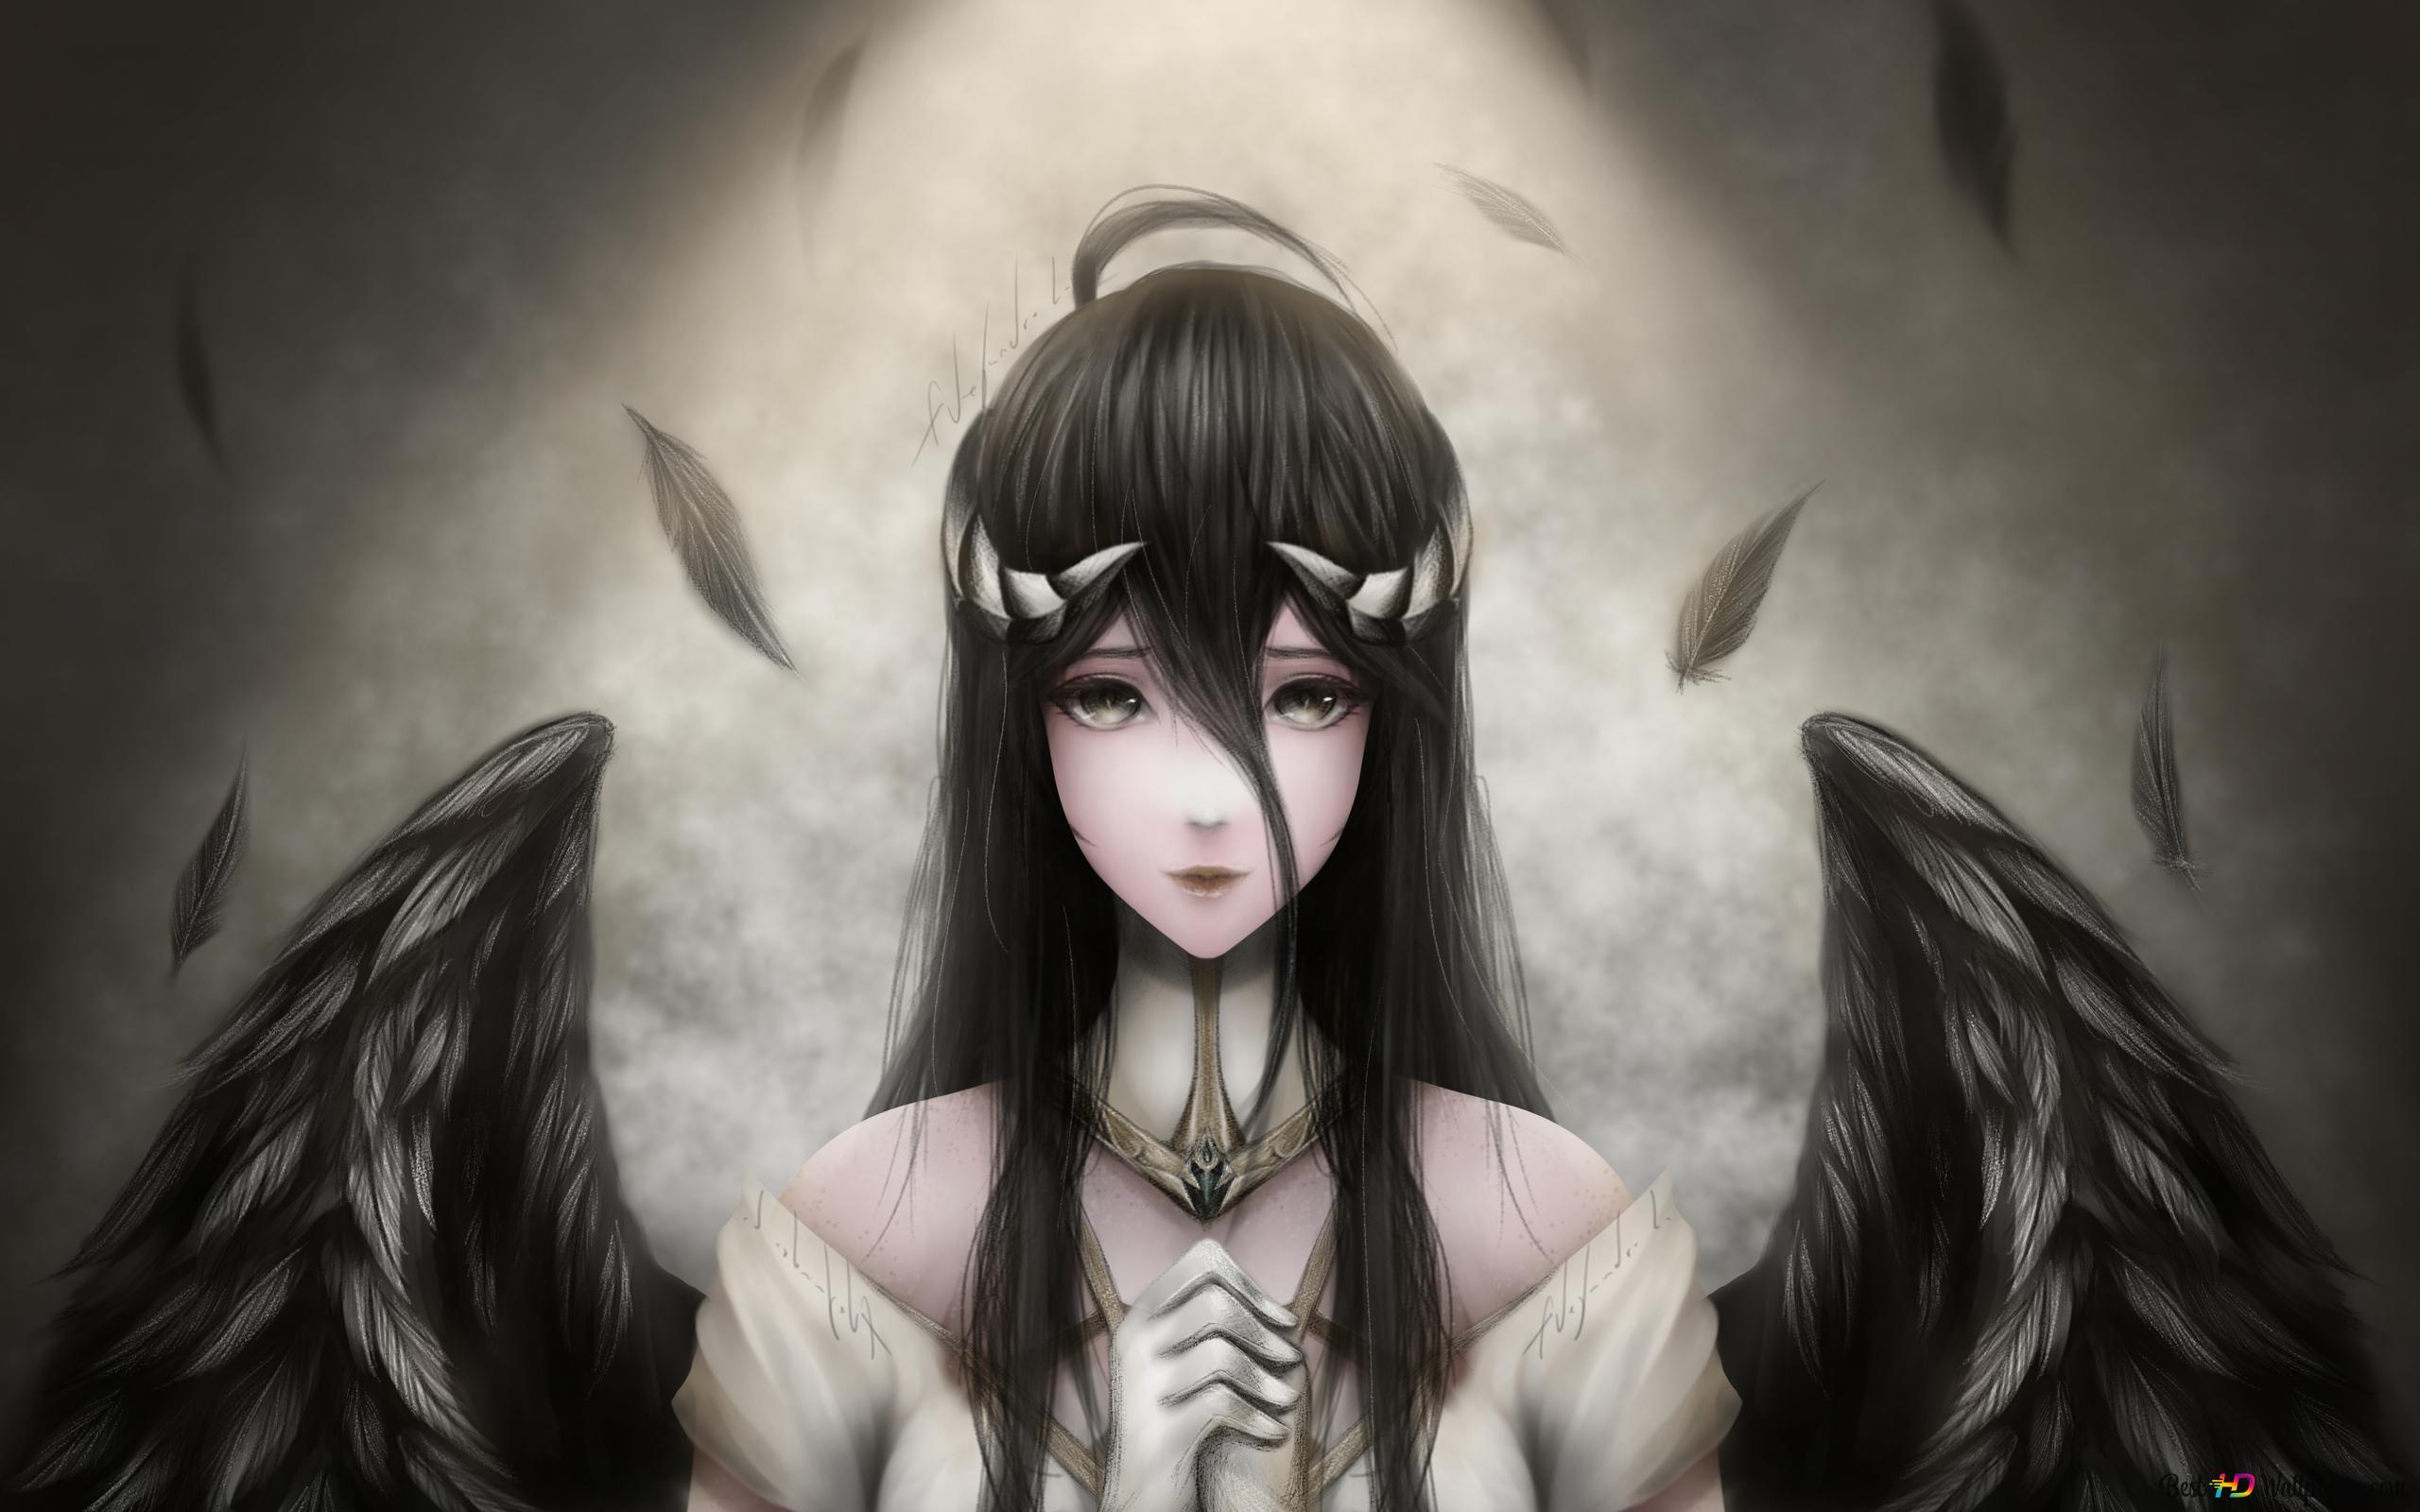 Stare of beautiful anime girl with black hair and black eyes with black angel wings 2K wallpaper download